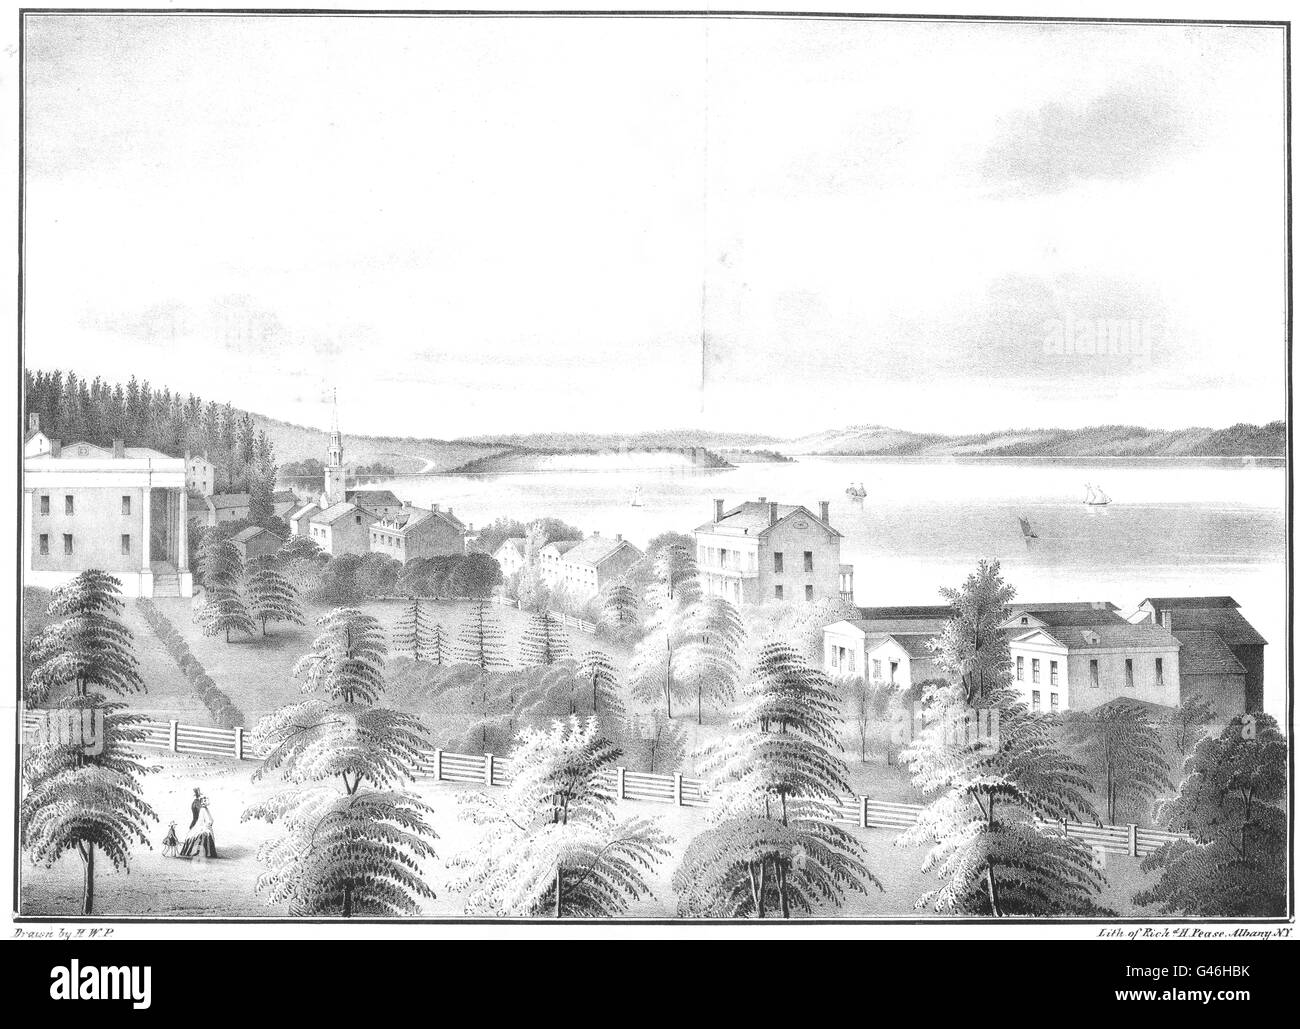 NEW YORK STATE: Aurora, N. Y. from the North Poplars 1848, antique print 1850 Stock Photo